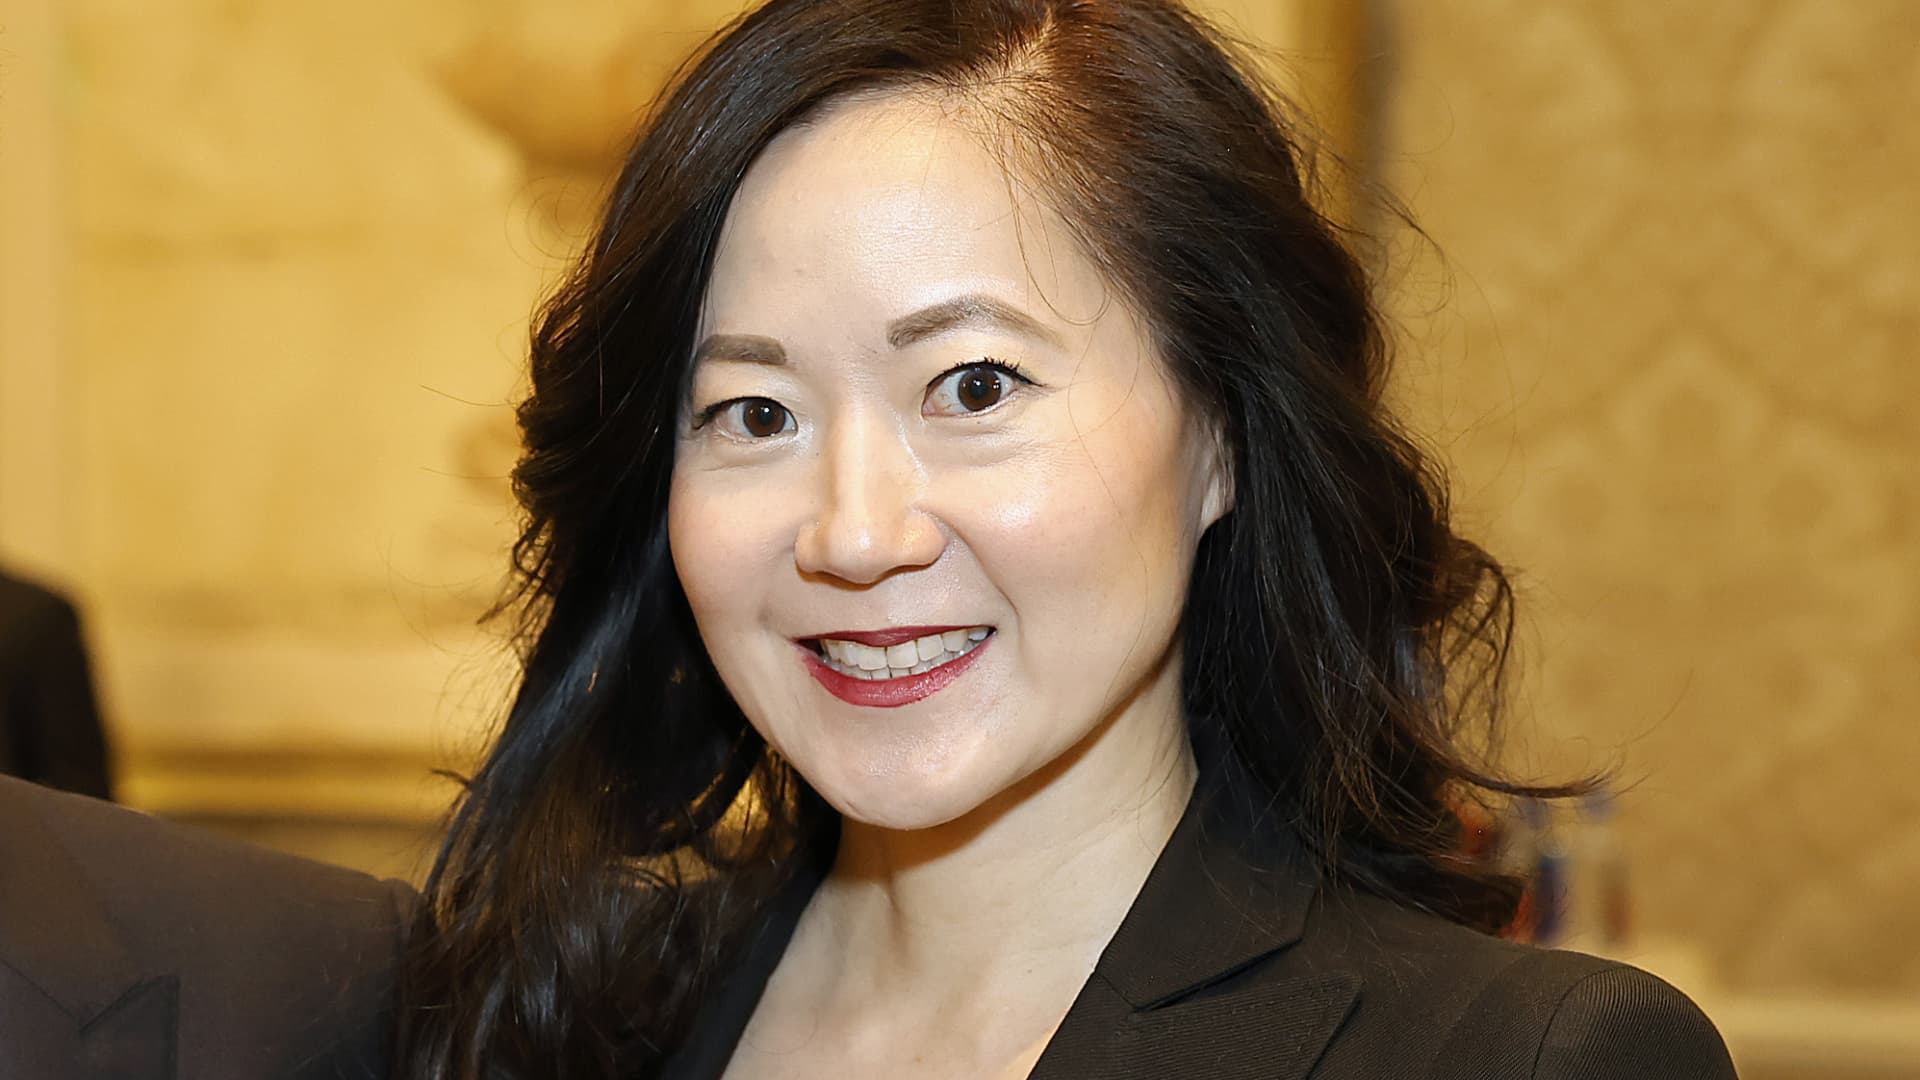 Foremost Group CEO Angela Chao was intoxicated during fatal car accident in Texas pond: police Auto Recent